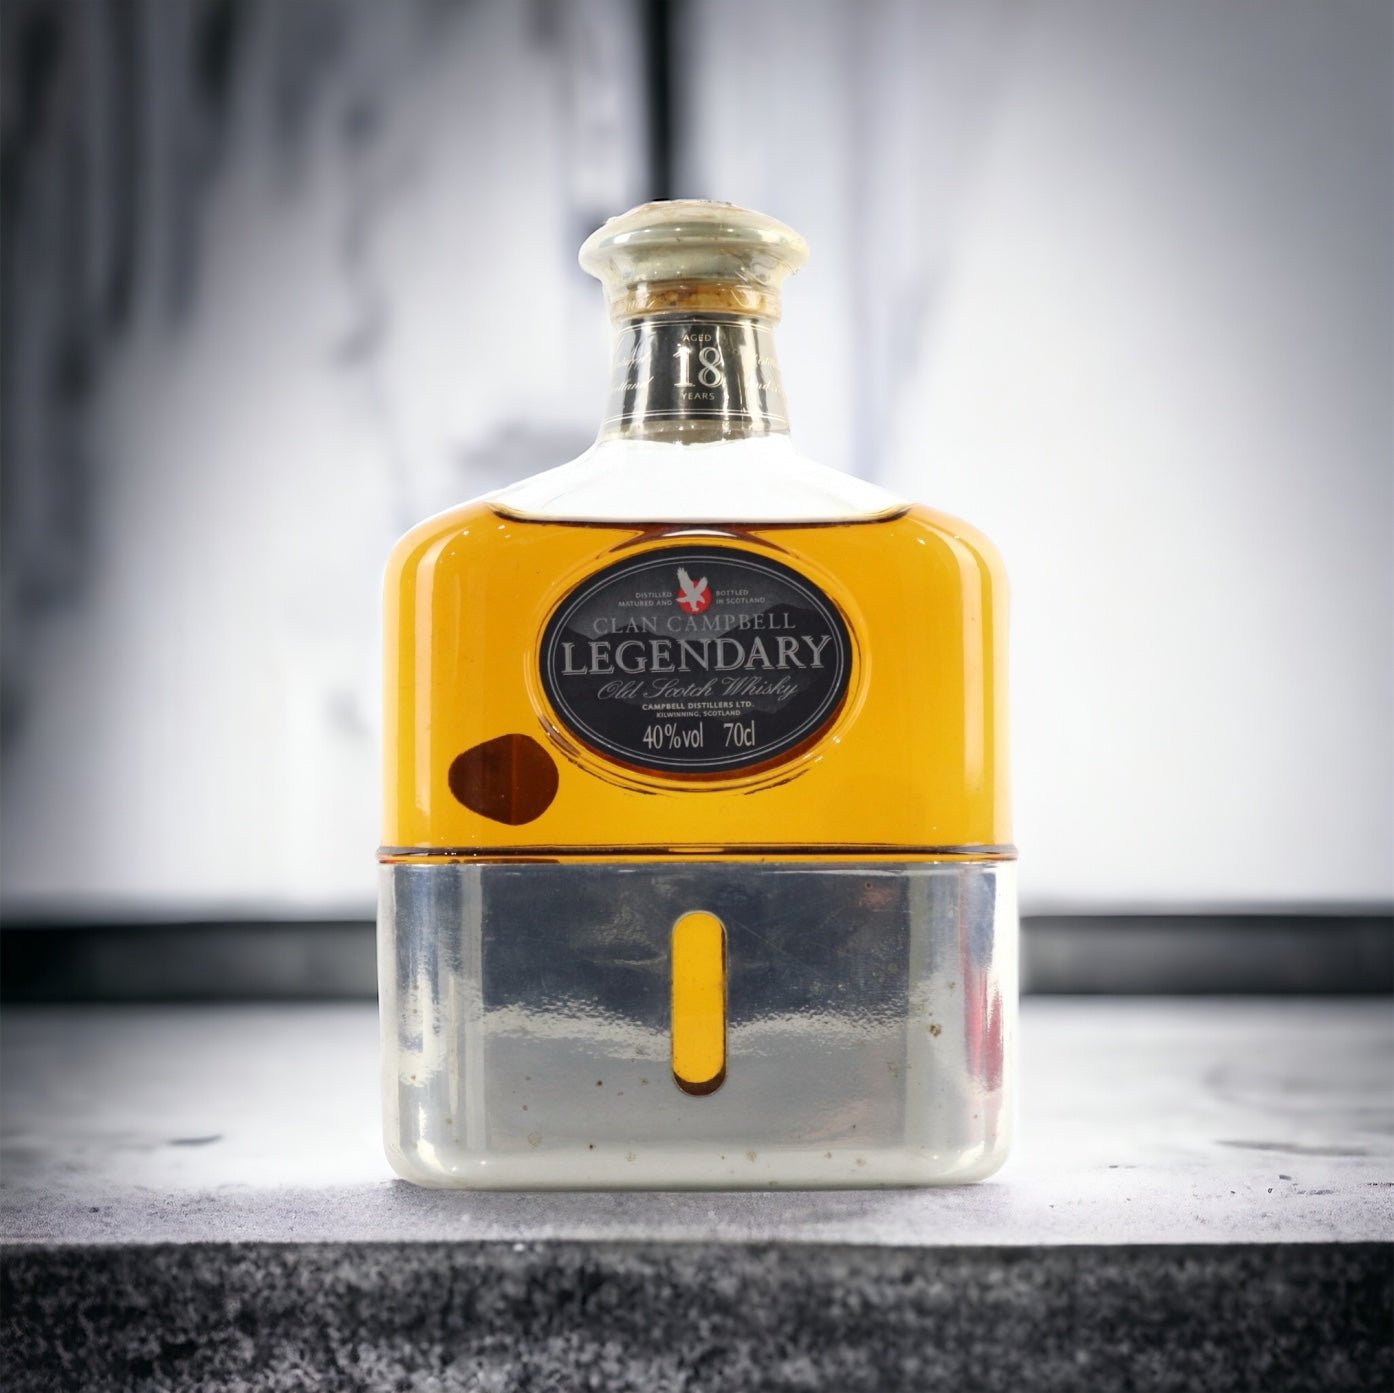 Introducing Clan Campbell Legendary 18 Year Old Scotch Whisky